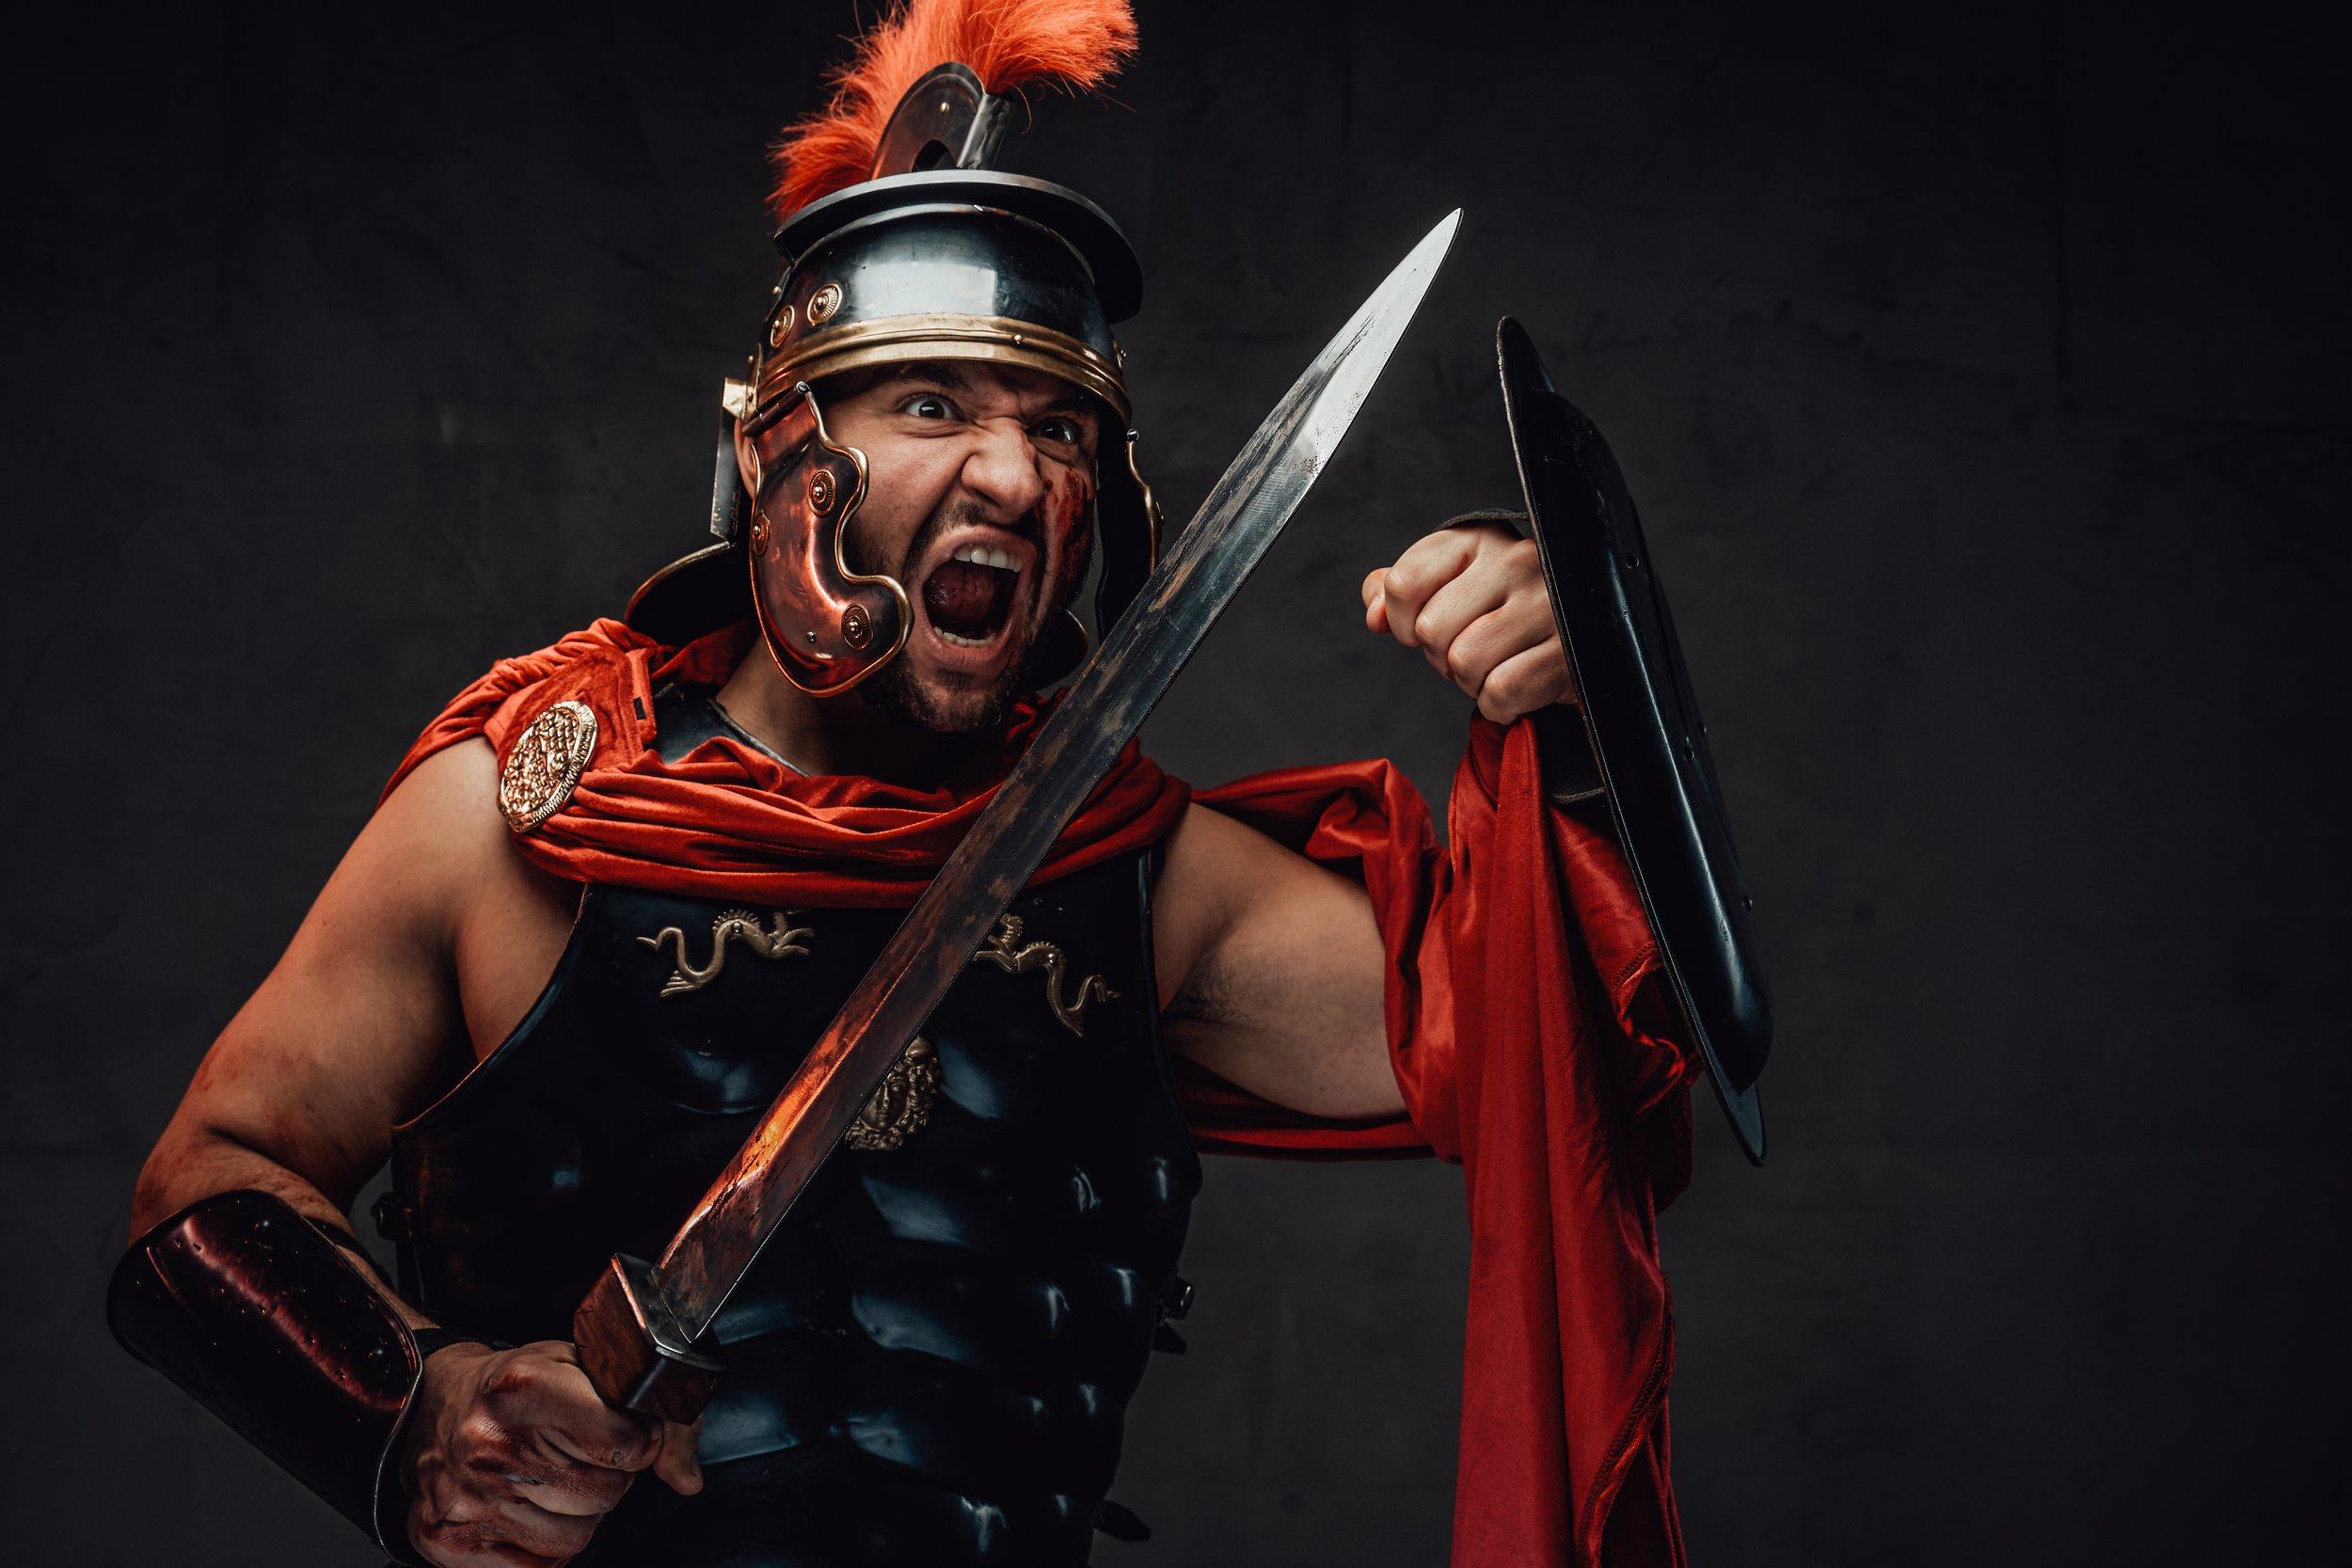 10 Deadly Weapons Of The Roman Army You Won’t Believe Existed!